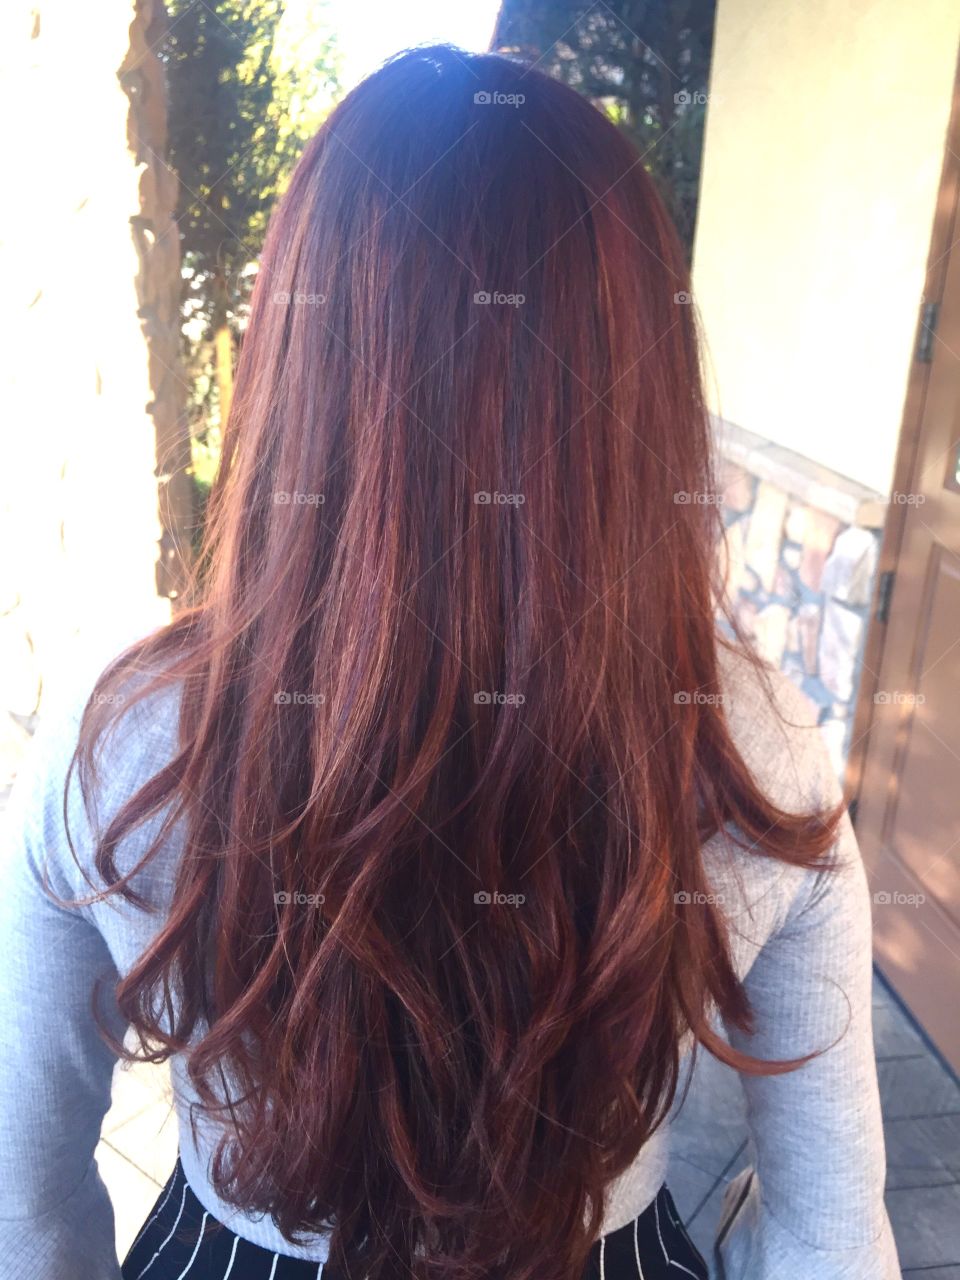 The back of a young woman’s head with reddish brown balayage ombré hair